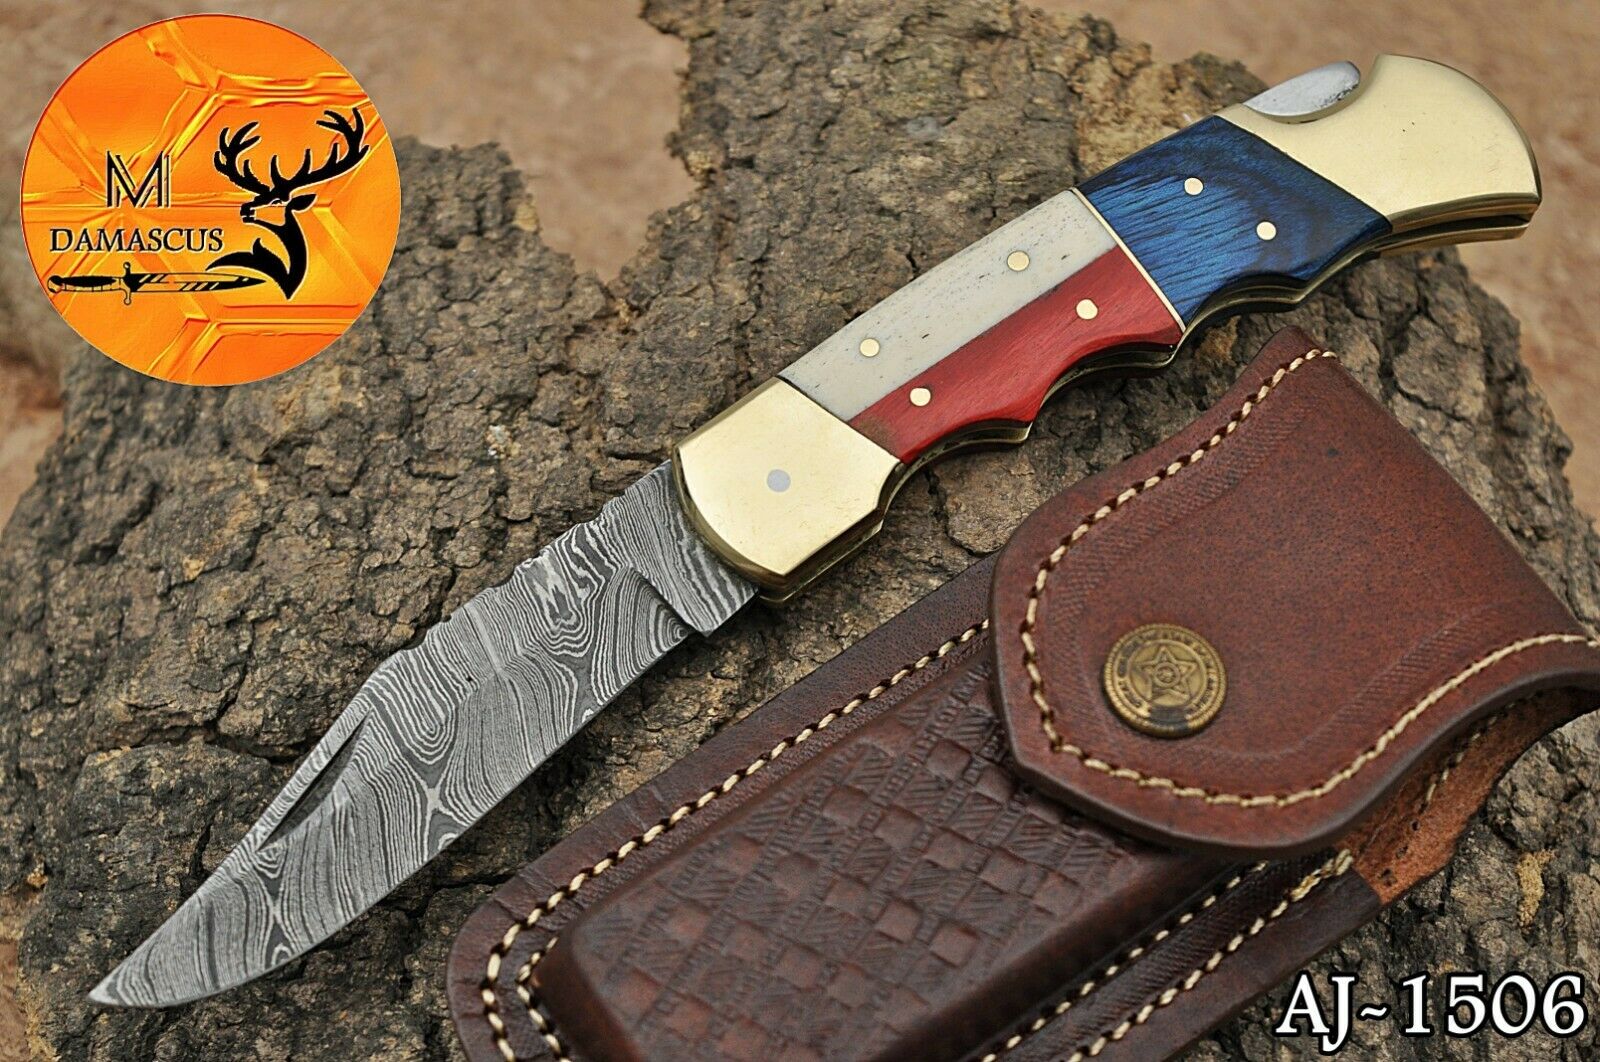 5" Hand Forged Damascus Steel Folding Pocket Knife With Wood Handle Aj 1506